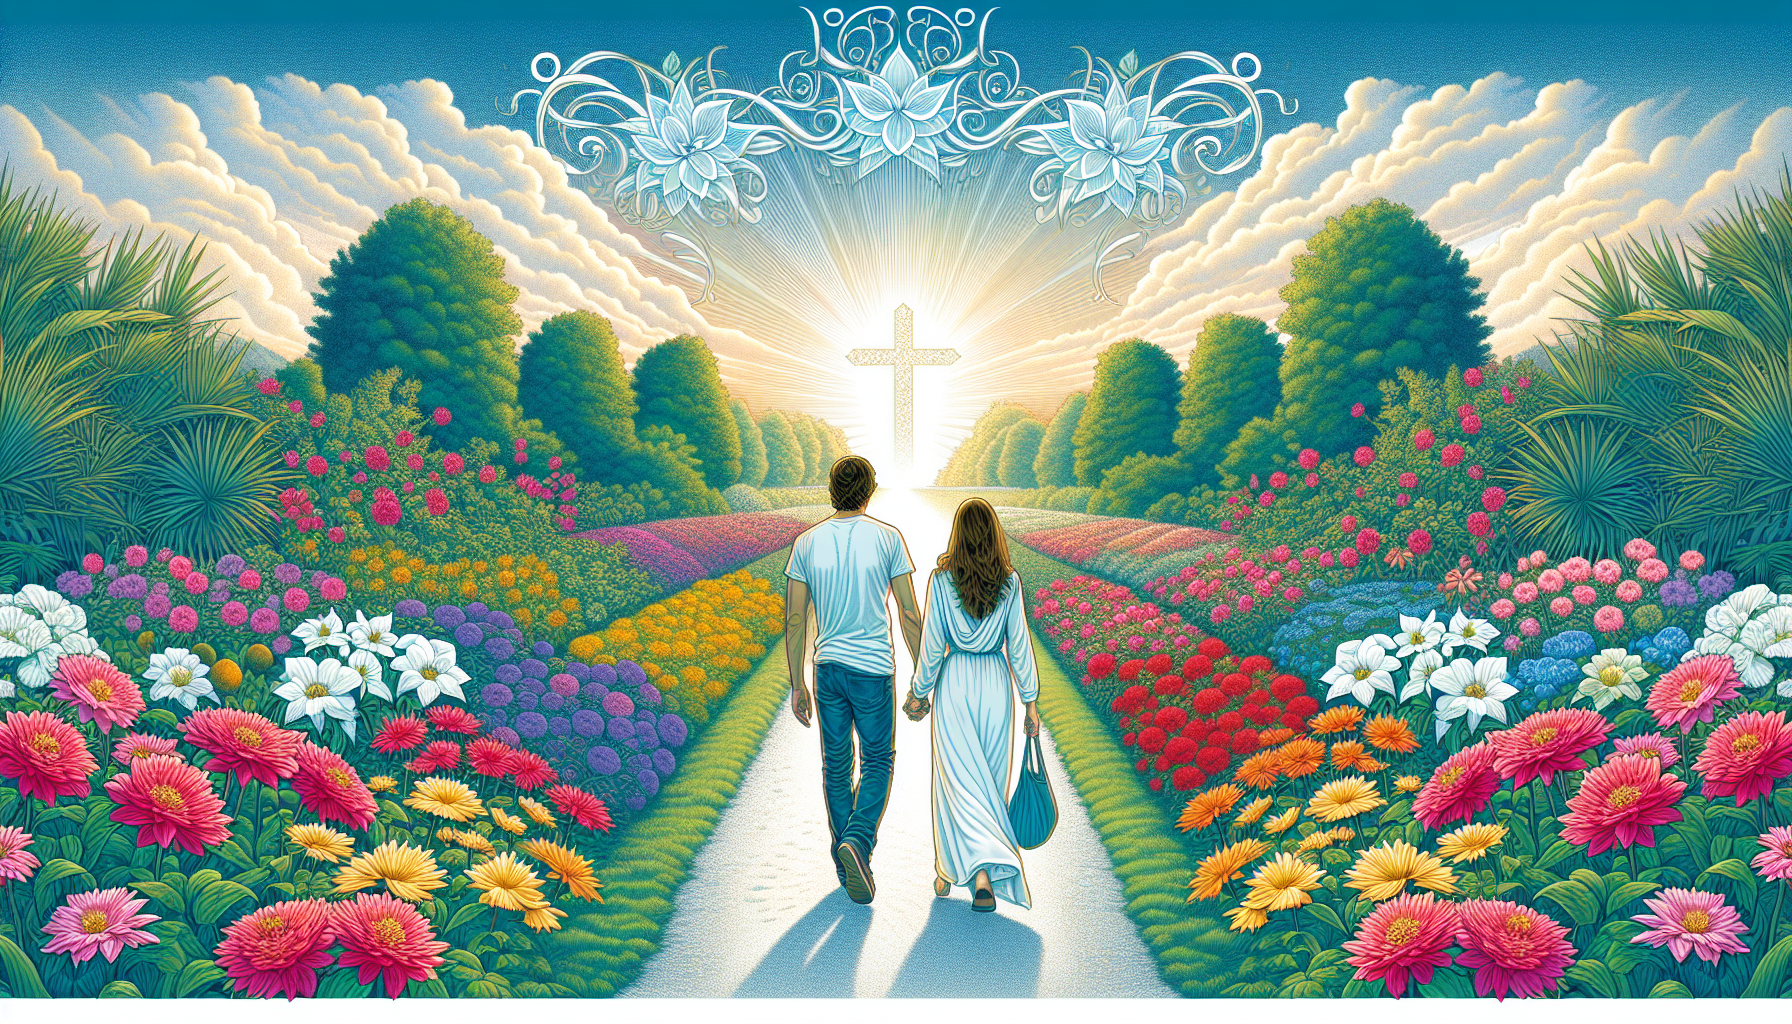 Create an image of a serene and beautiful garden setting where a Christian couple is holding hands and walking on a path. The garden is filled with vibrant flowers, and in the sky, there is a subtle,